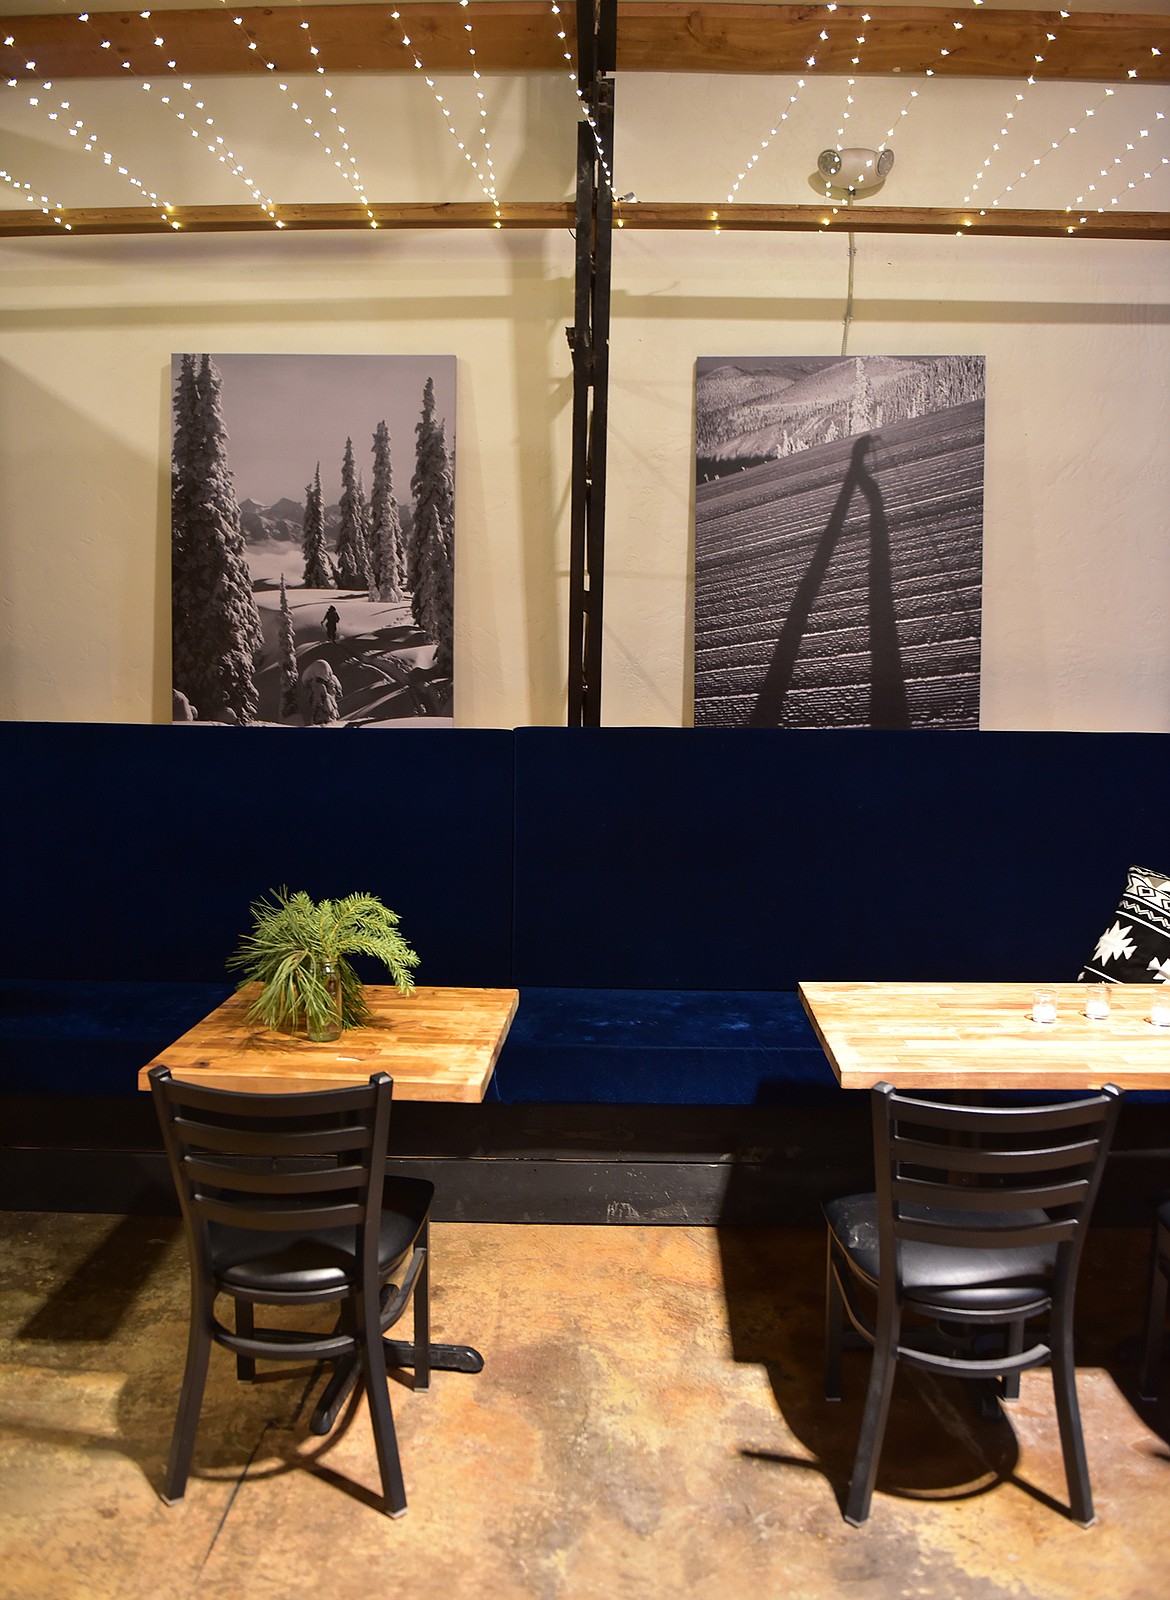 The Stumptown restaurant has a ski theme and includes local photographs by Patrick Muri. (Heidi Desch/Whitefish Pilot)